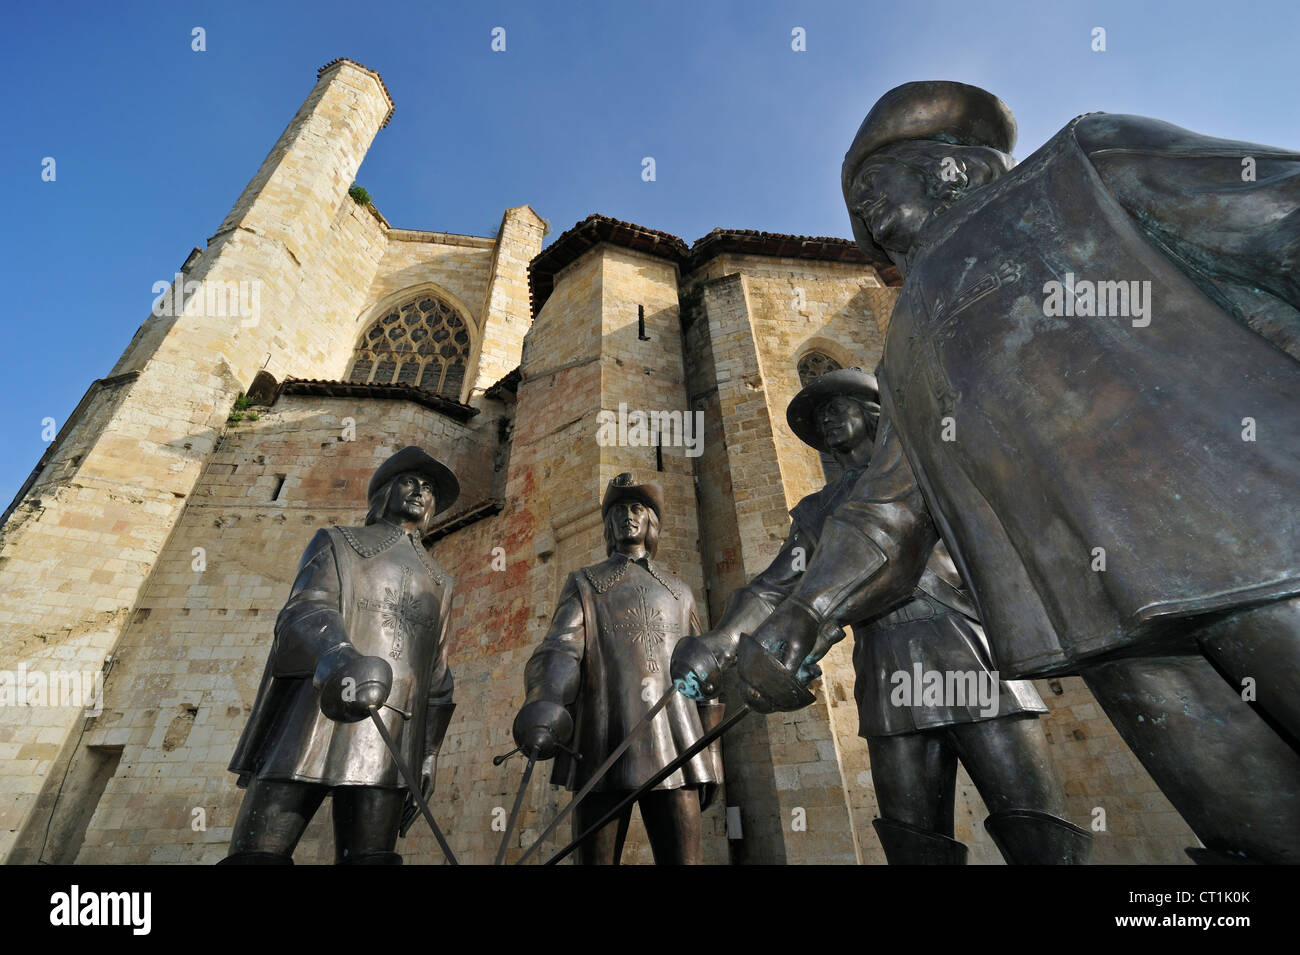 Statue of d'Artagnan and The Three Musketeers at Condom / Condom-en-Armagnac, Midi-Pyrénées, Pyrenees, France Stock Photo